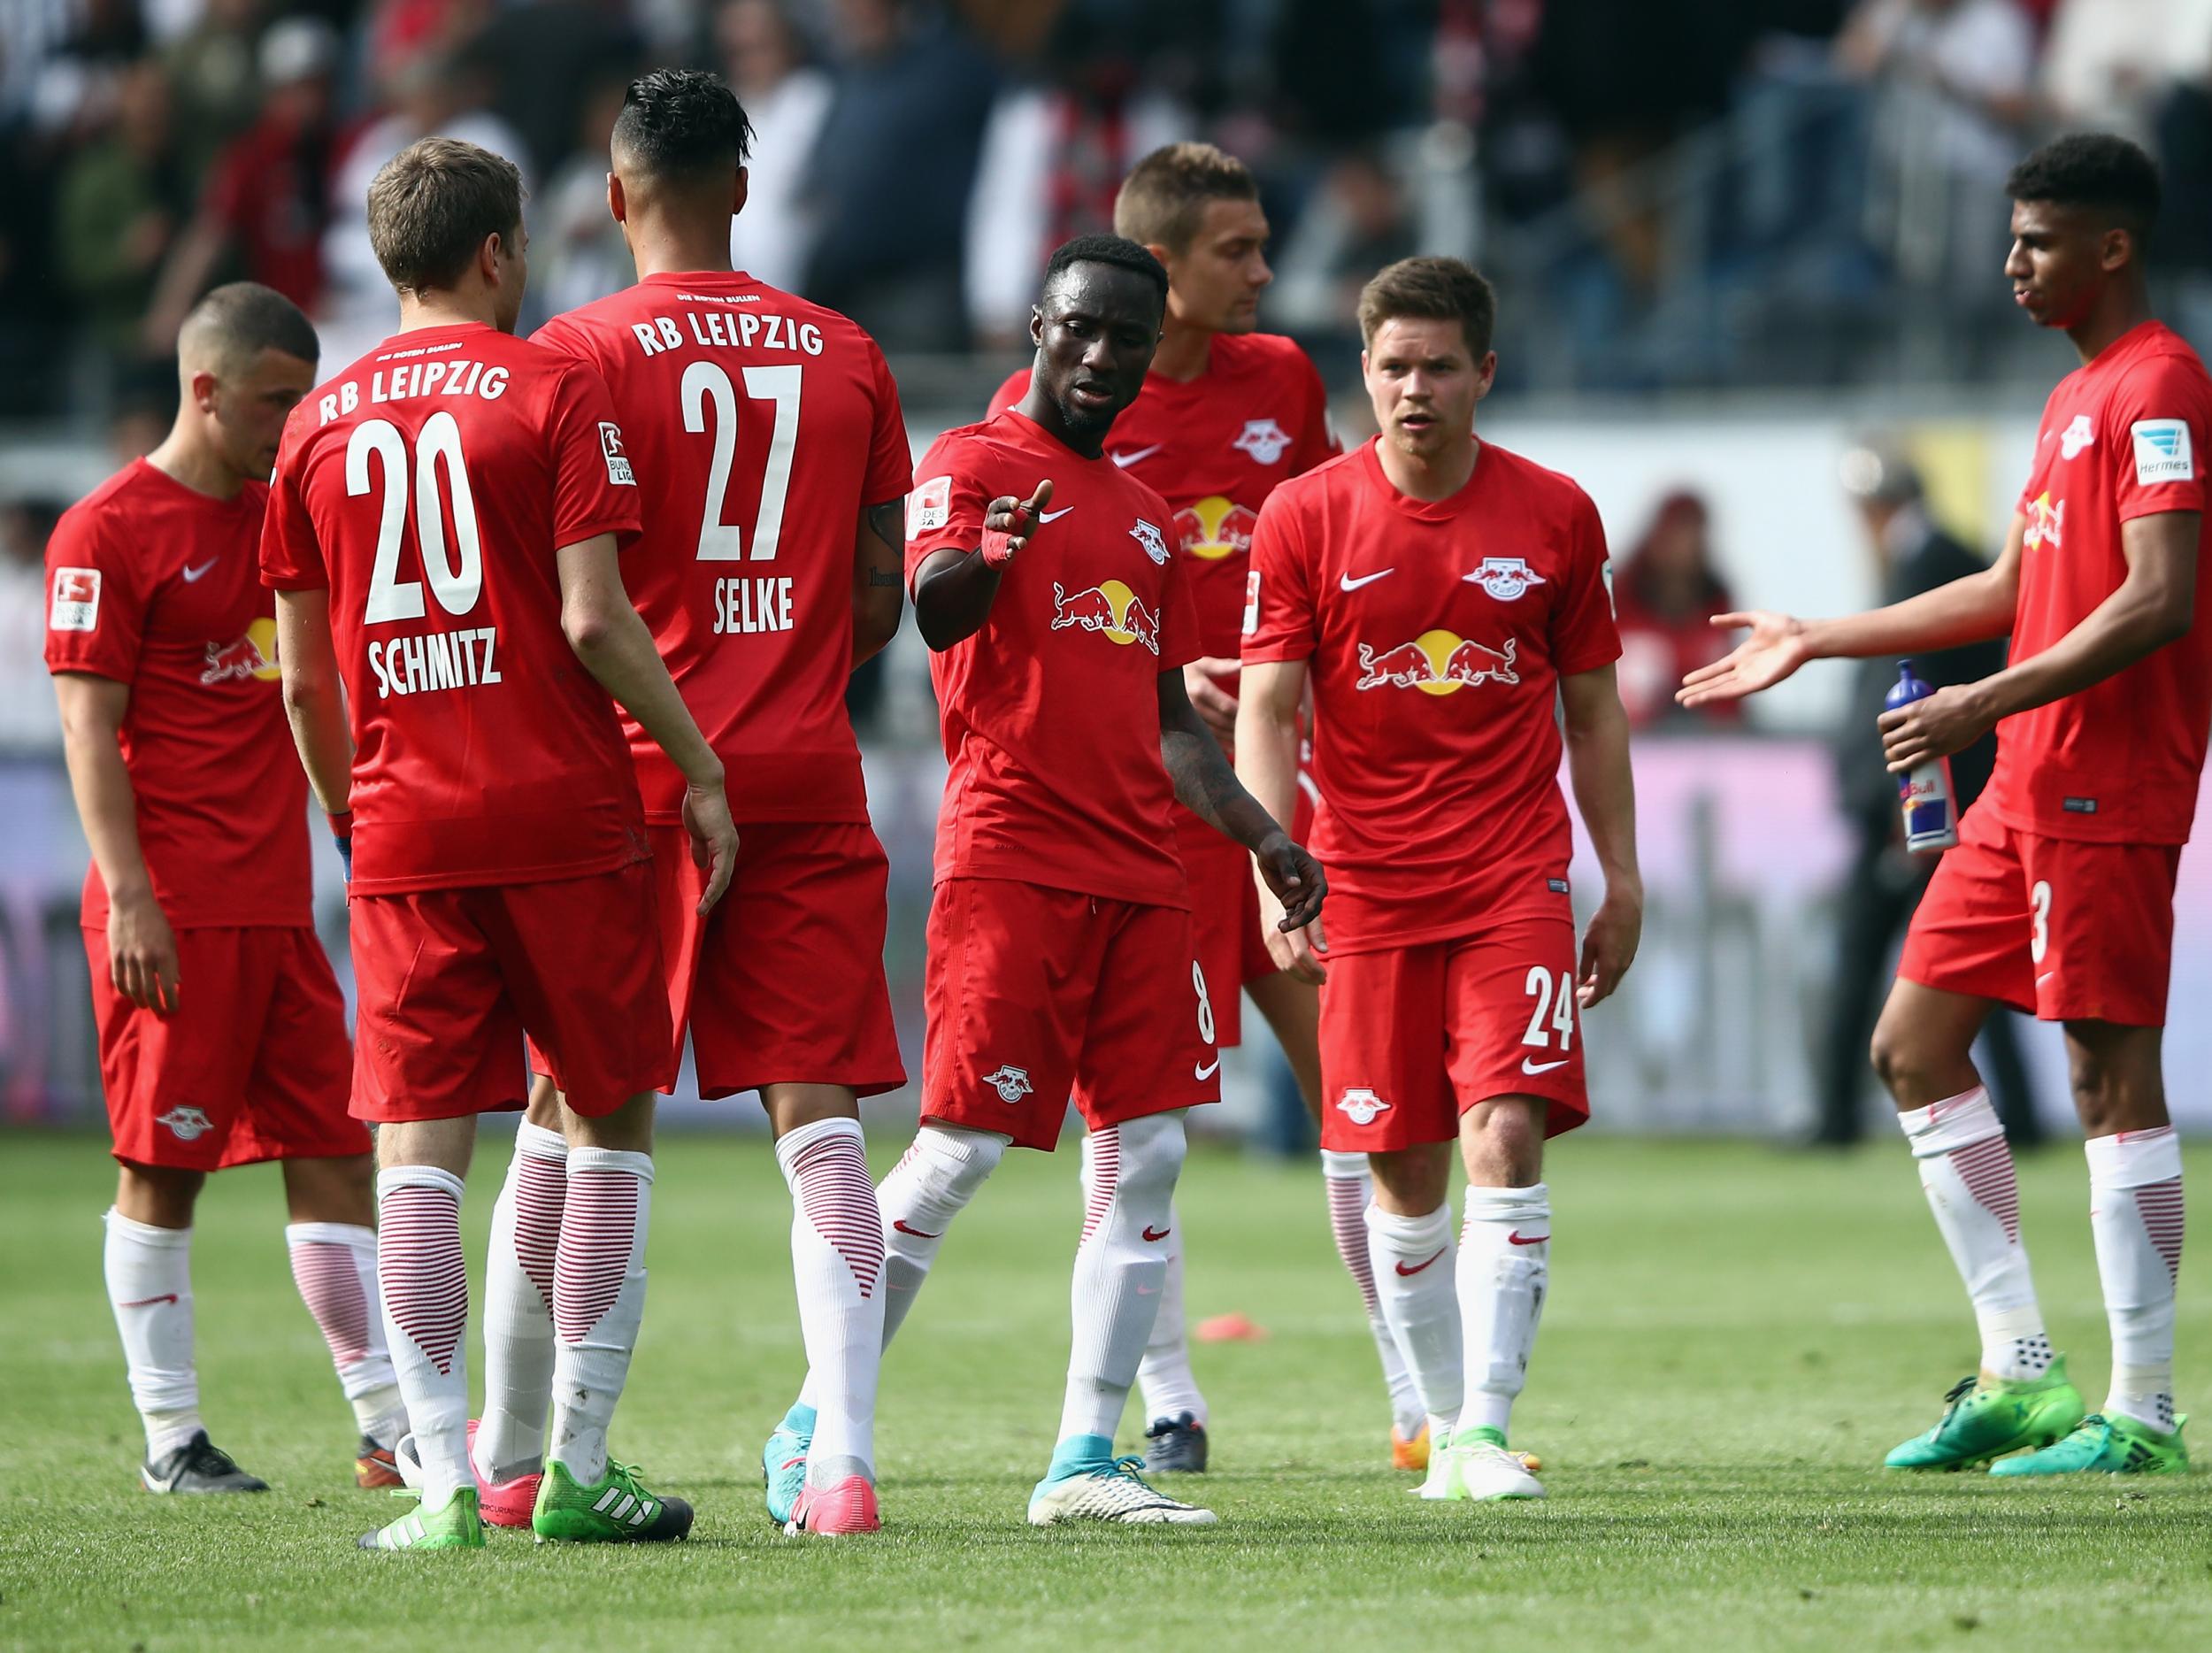 The article compared German club RB Leipzig to the SS